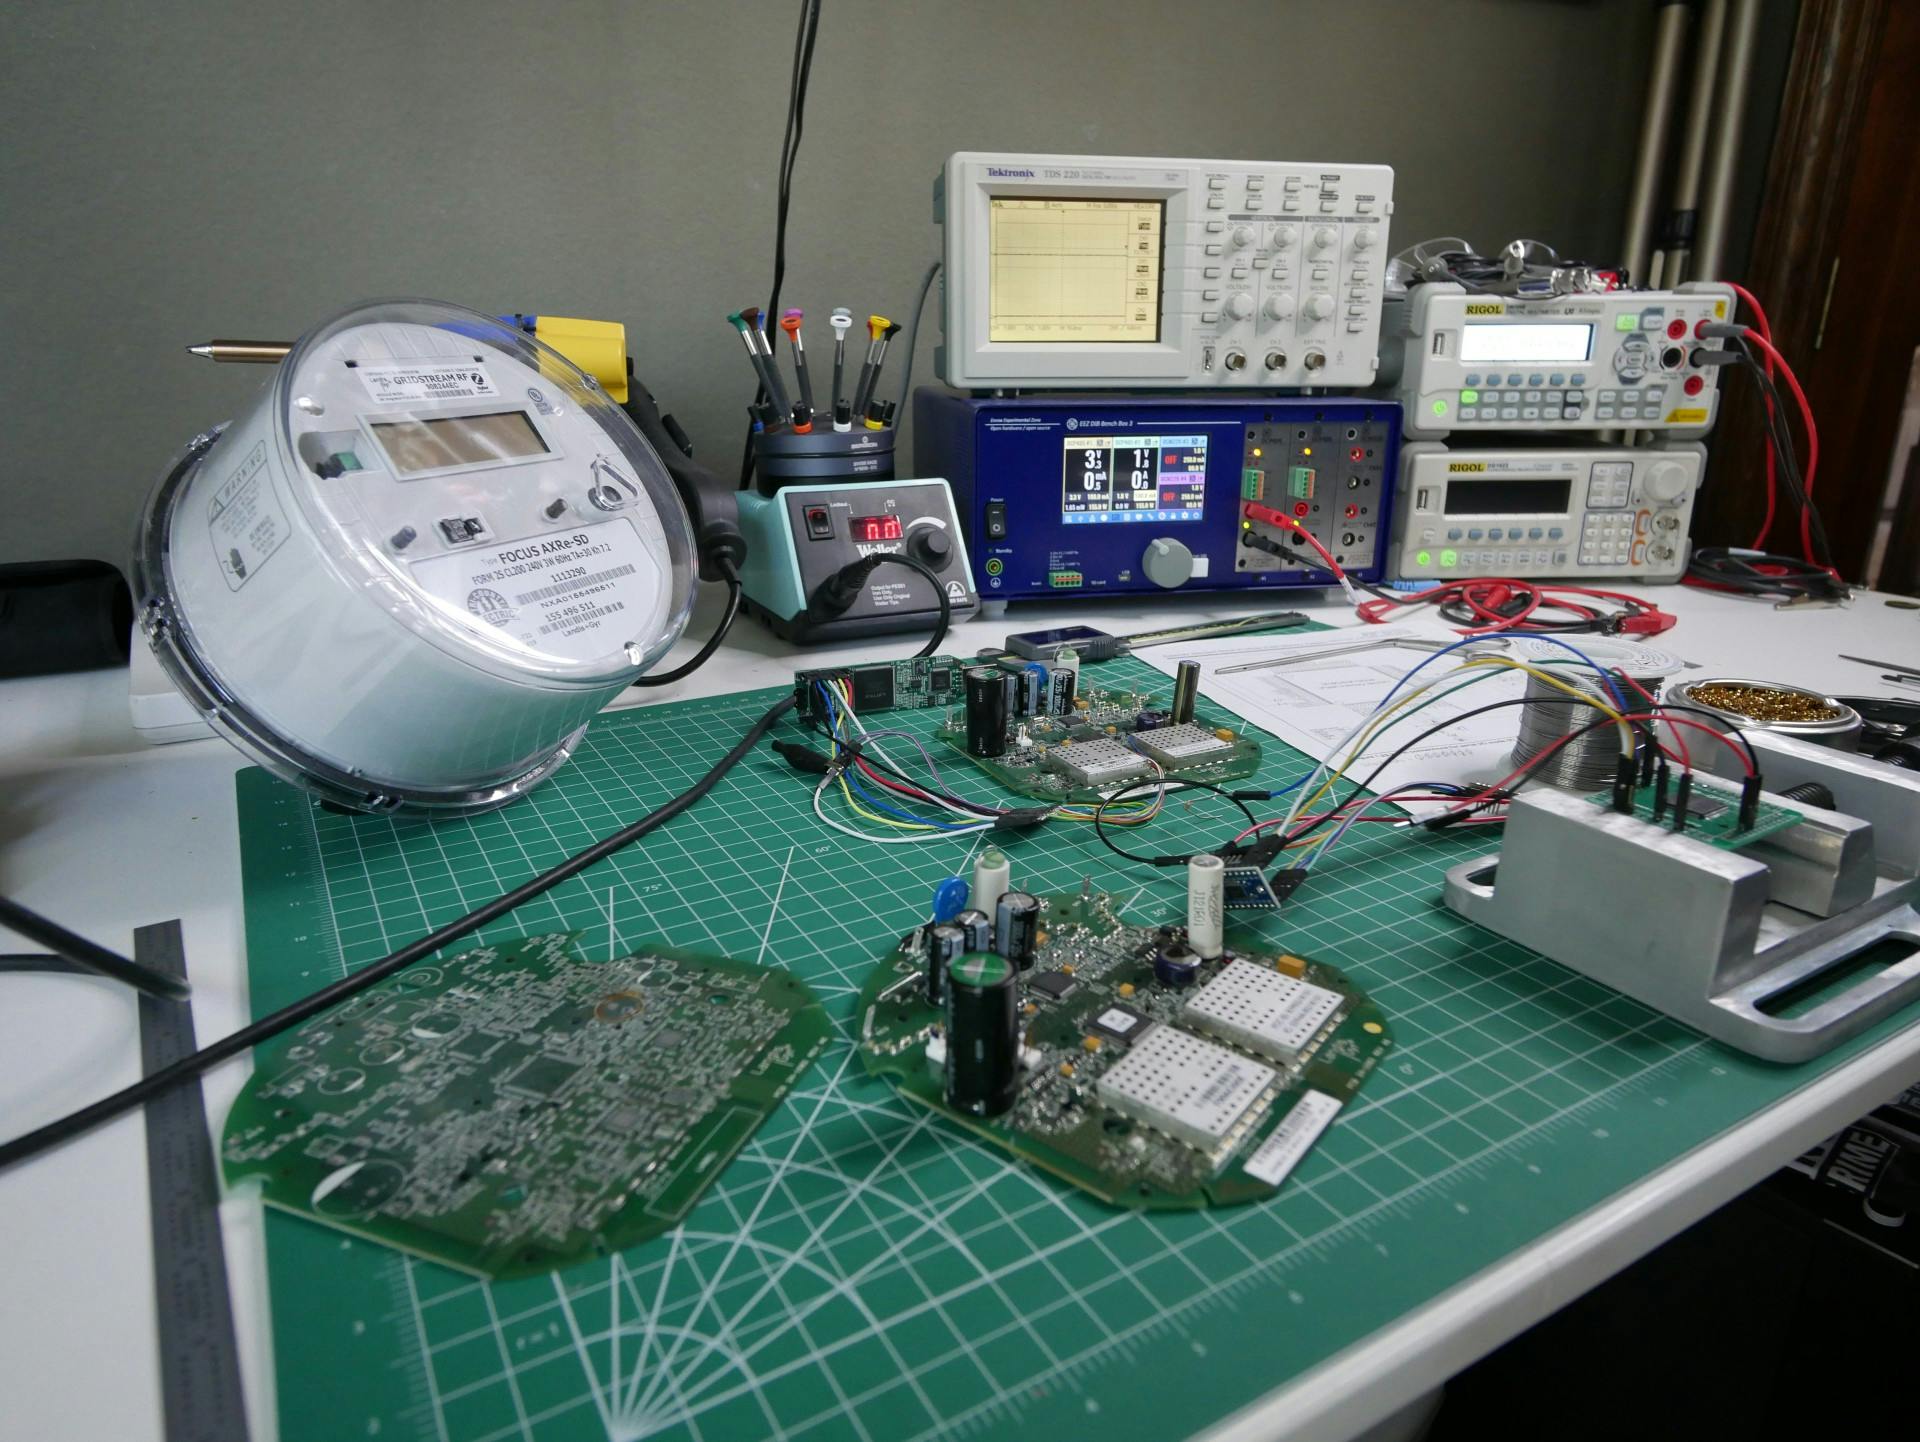 A desk with smart meter components